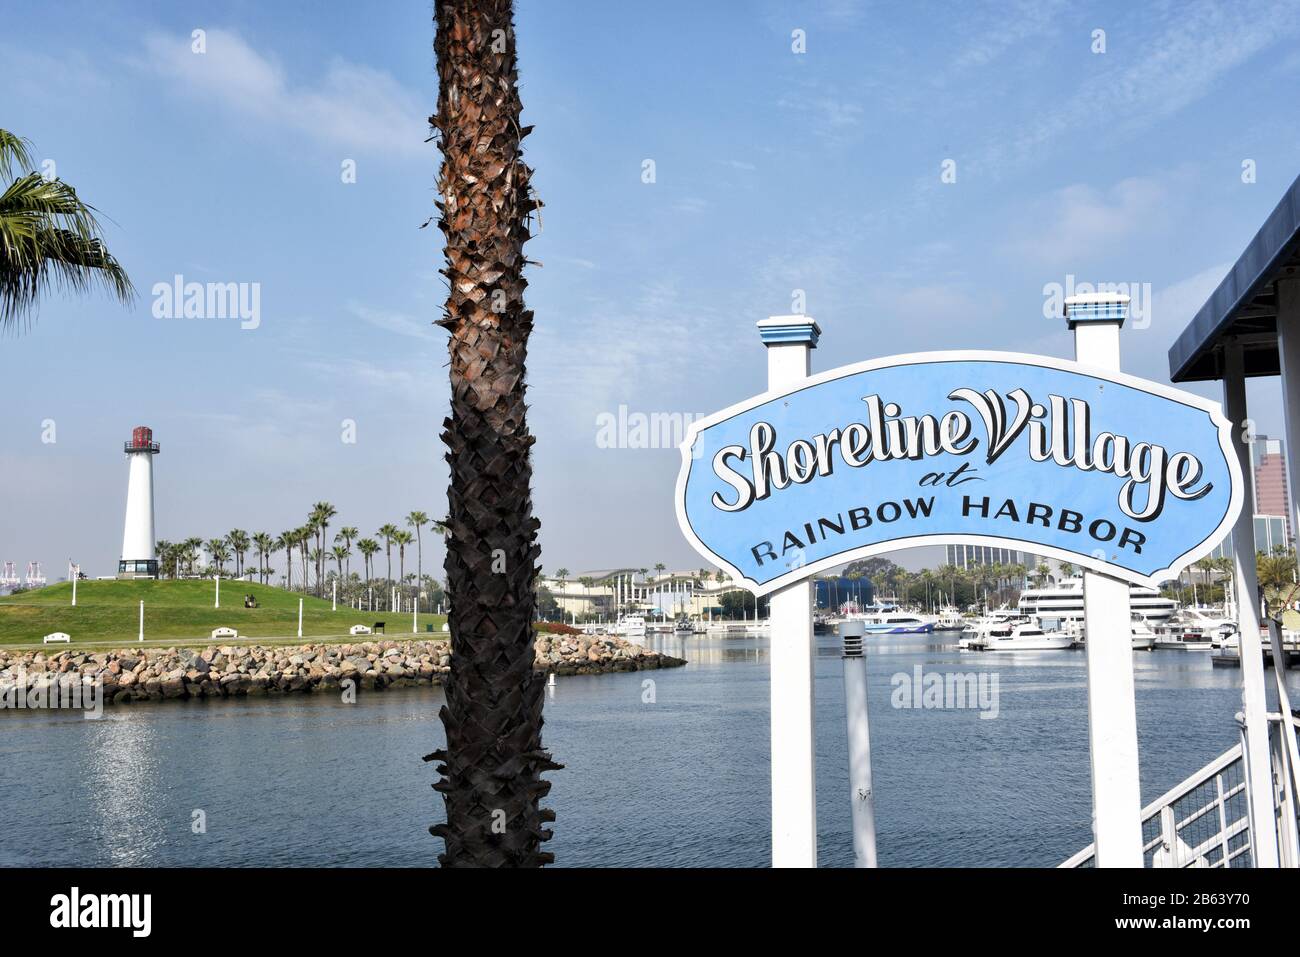 LONG BEACH, CALIFORNIA - 06 MAR 2020: Shoreline Village sign at Rainbow Harbor with Lighthouse in the distance. Stock Photo